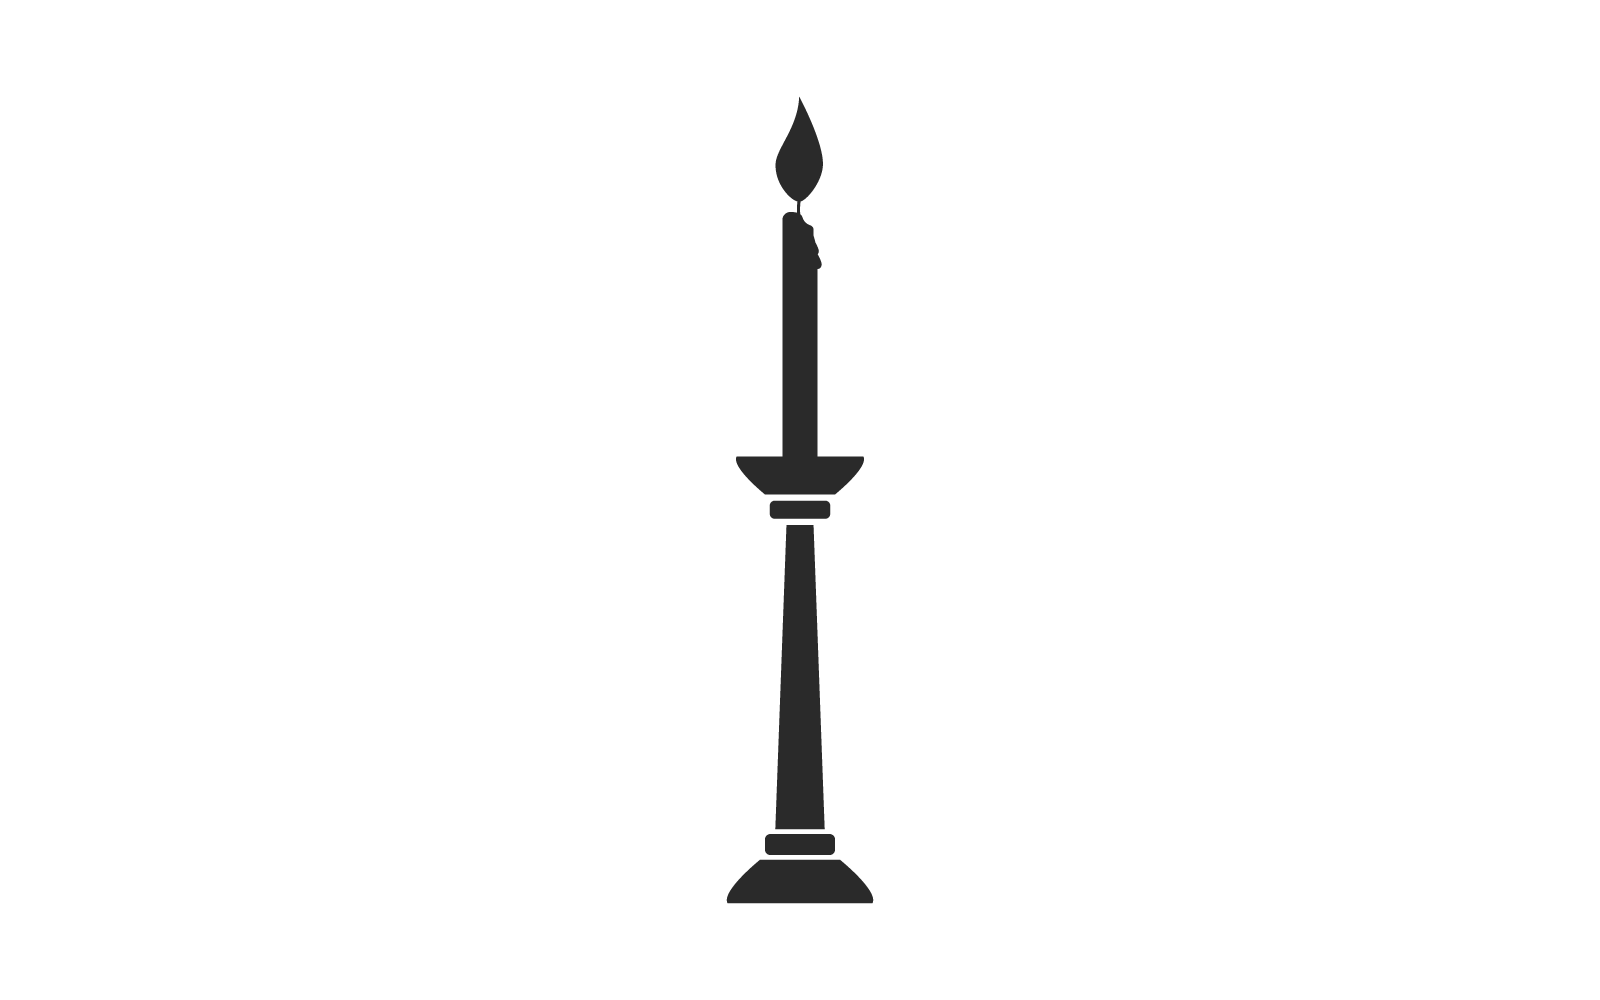 Candlelight dinner icon in flat design vector